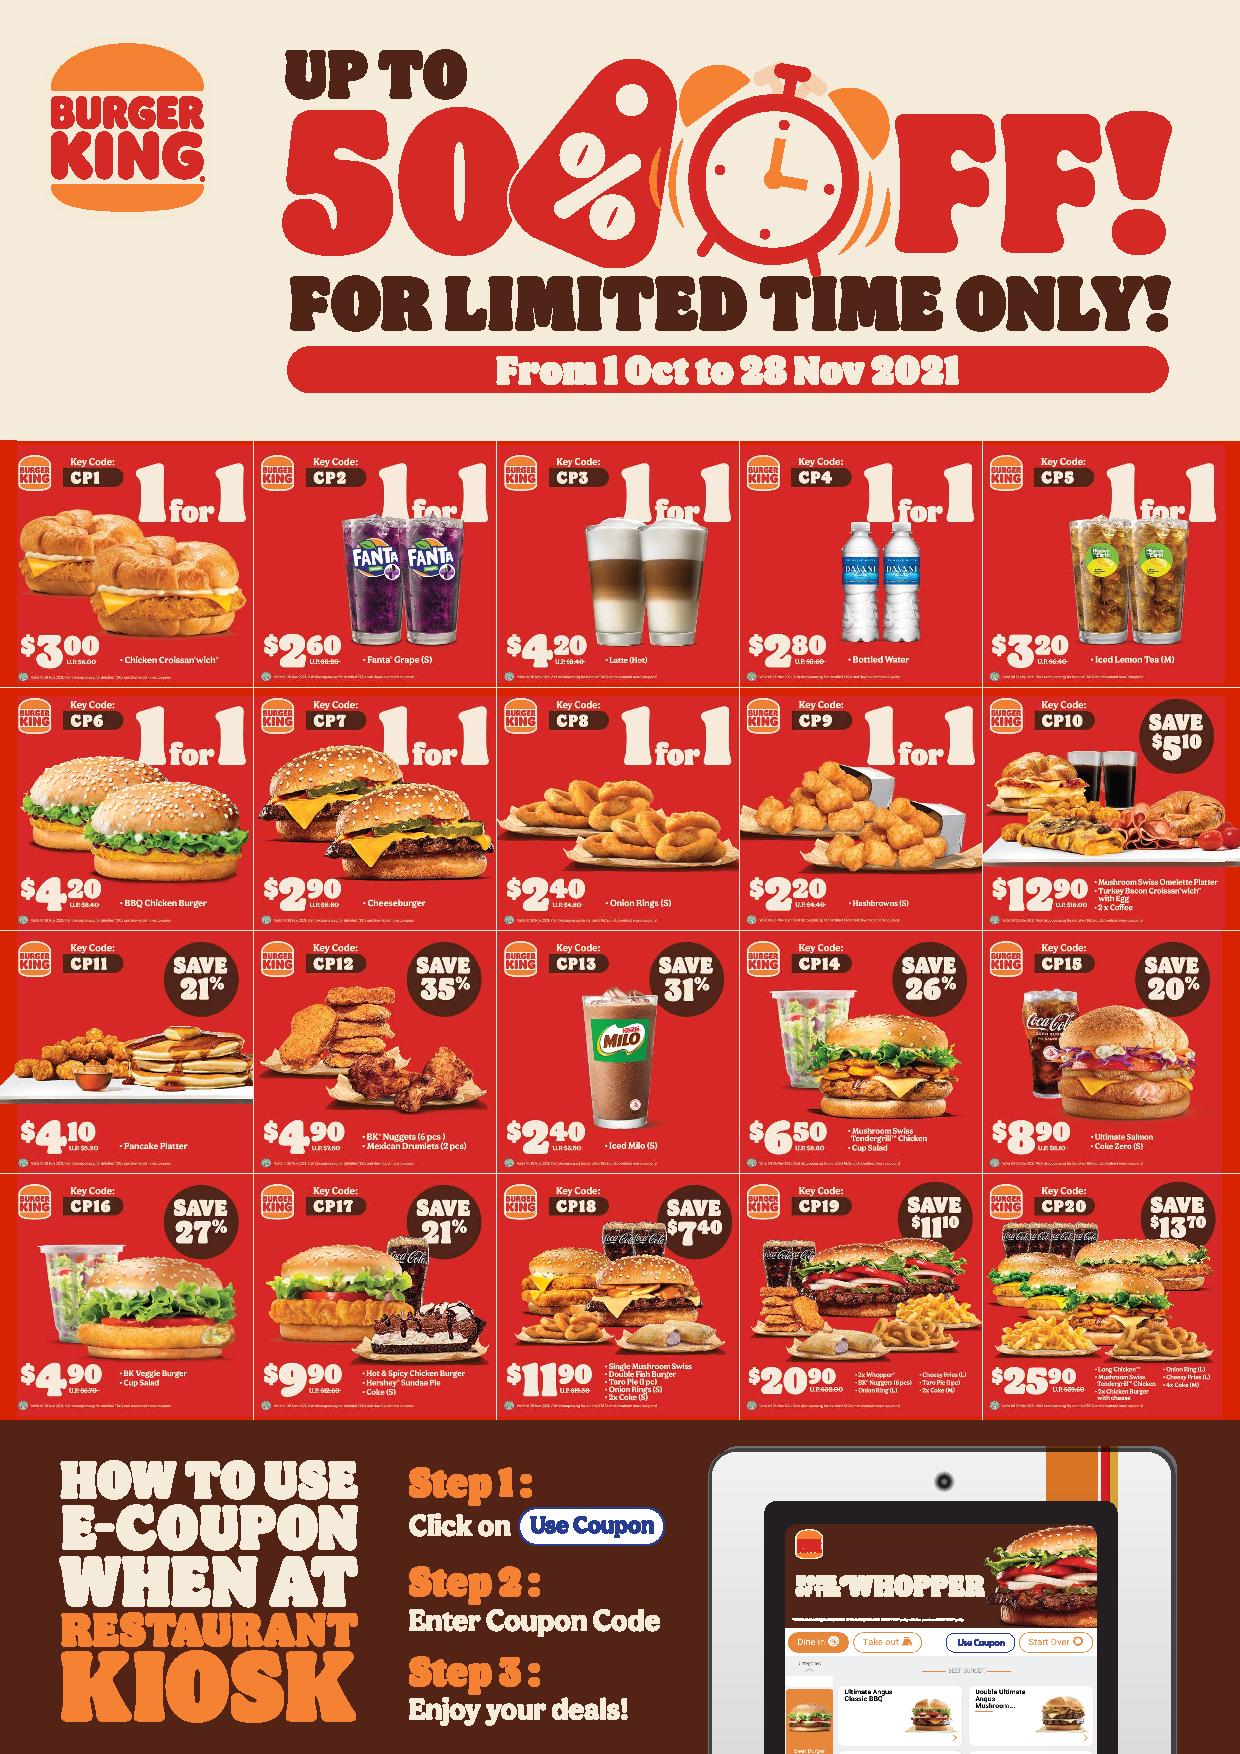 Burger king promotion today